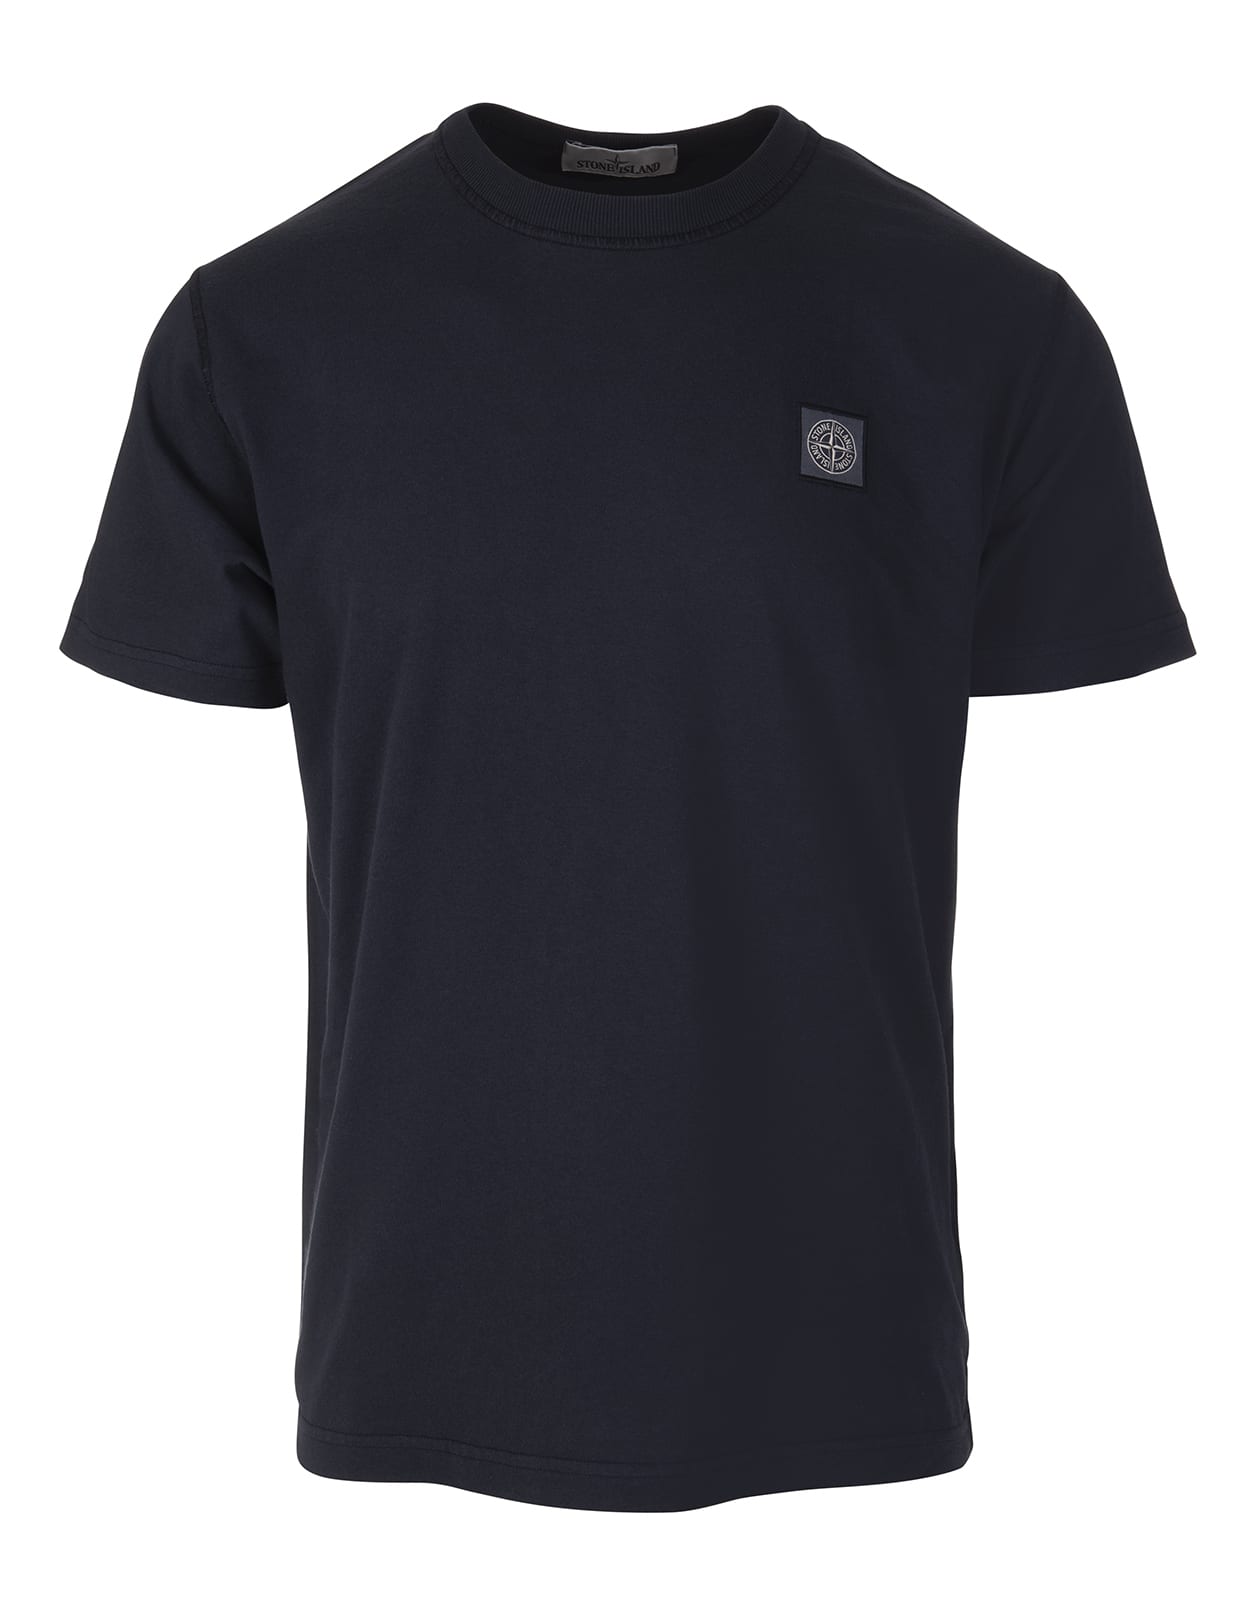 Man Regular Fit Navy Blue T-shirt With Compass Rose Stone Island Patch